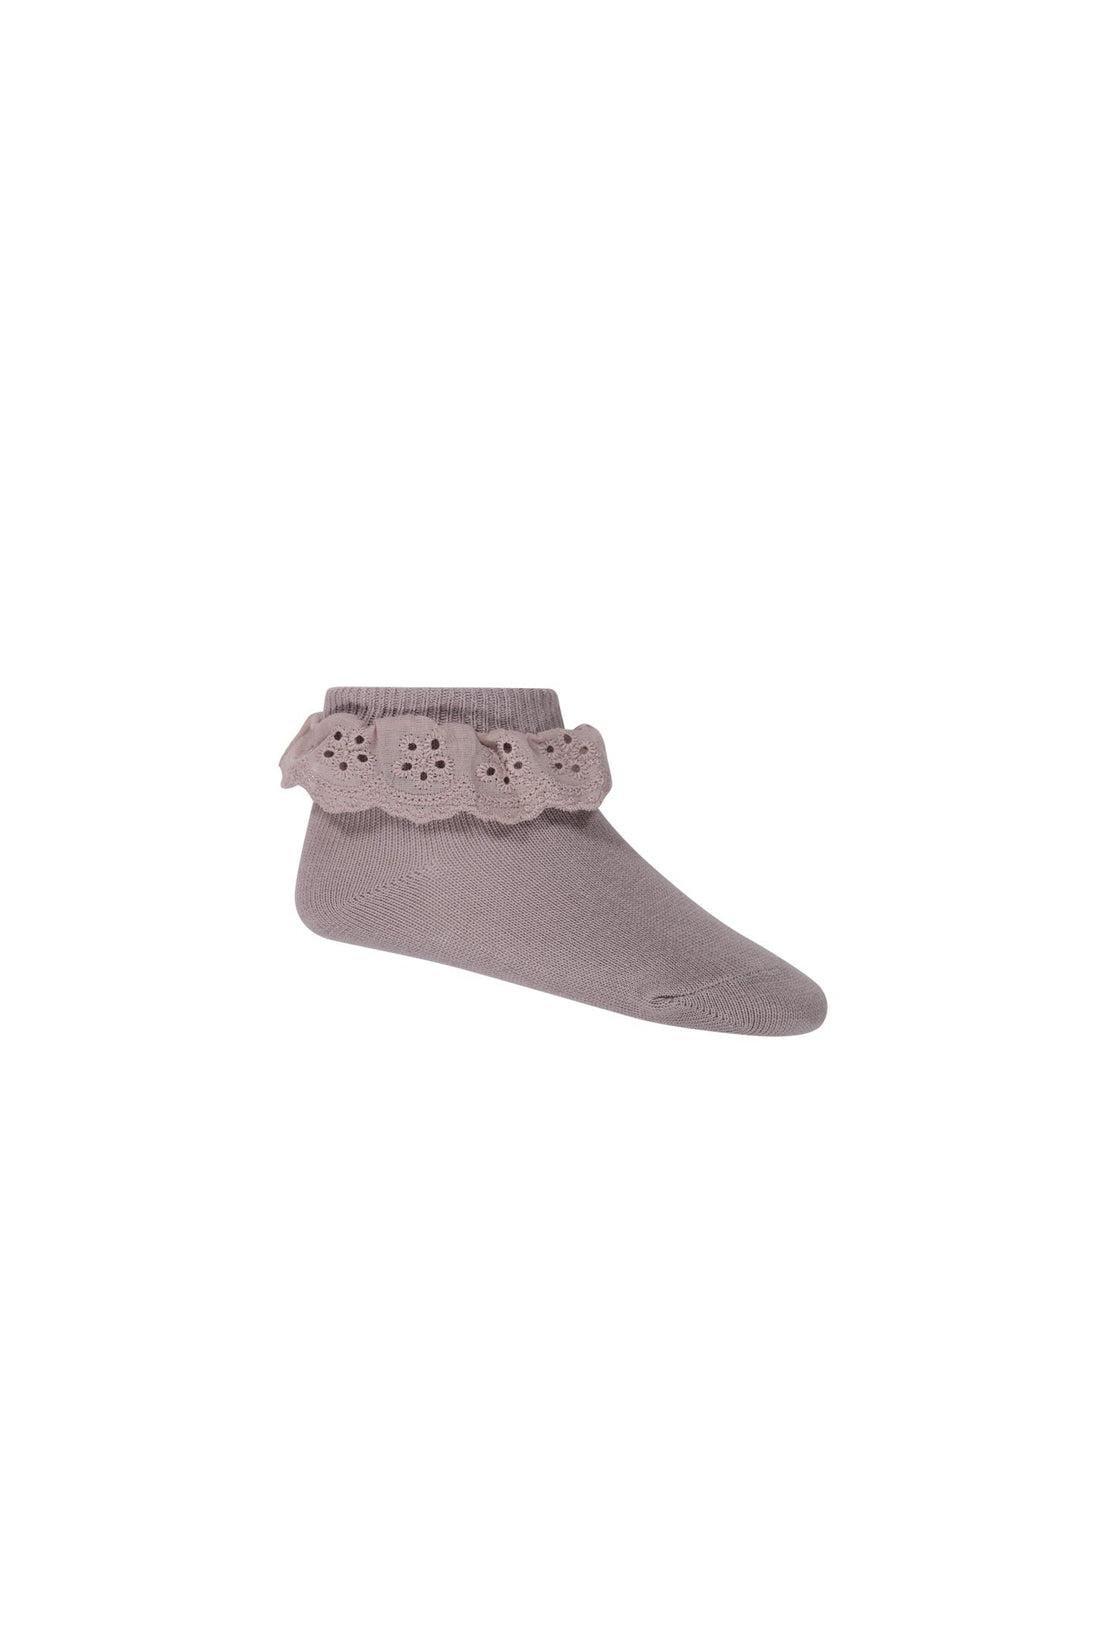 Frill Ankle Sock - Softest Mauve Childrens Sock from Jamie Kay USA